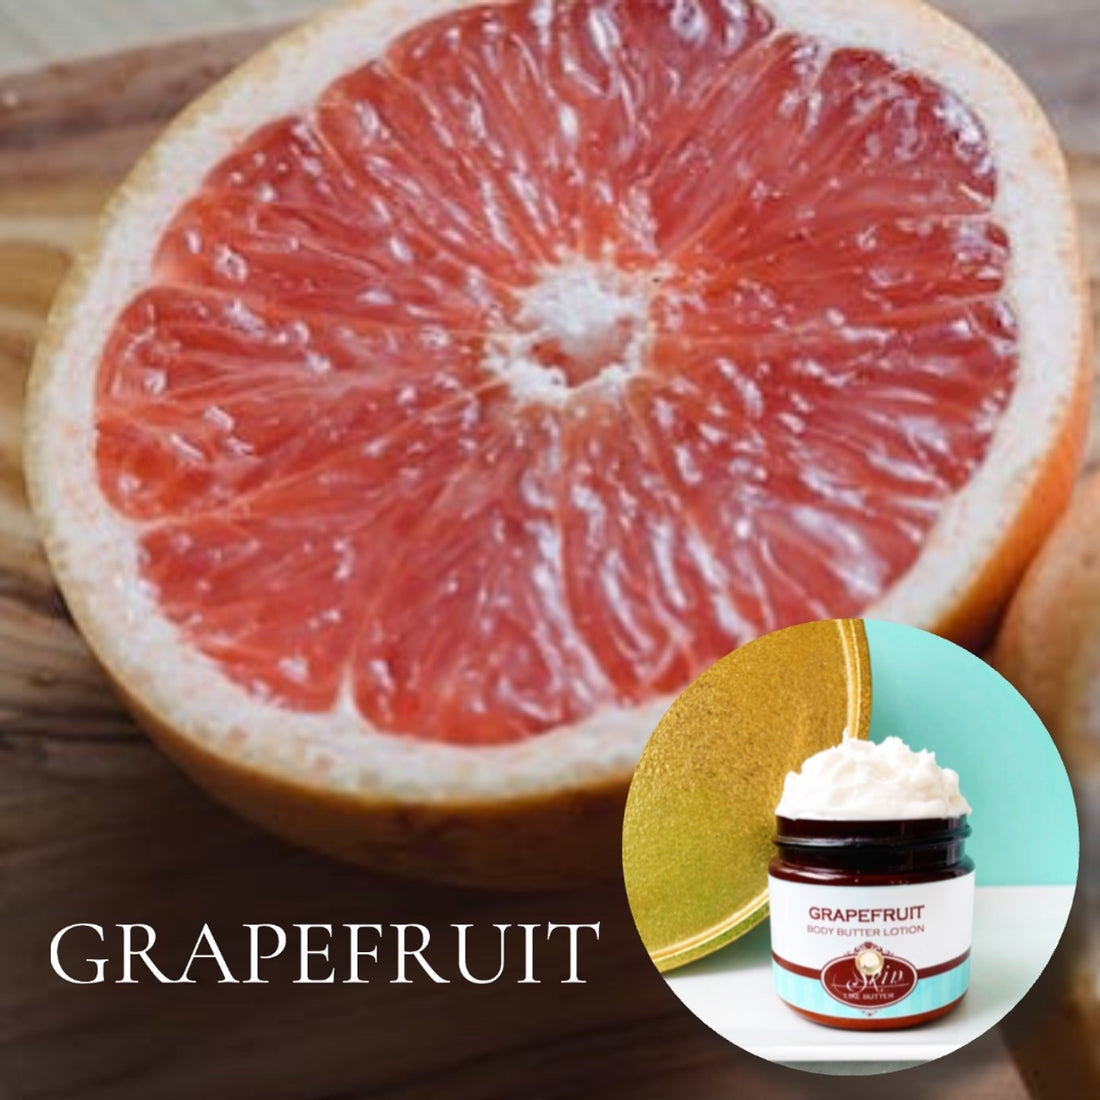 GRAPEFRUIT scented Body Butter that's vegan, and water free